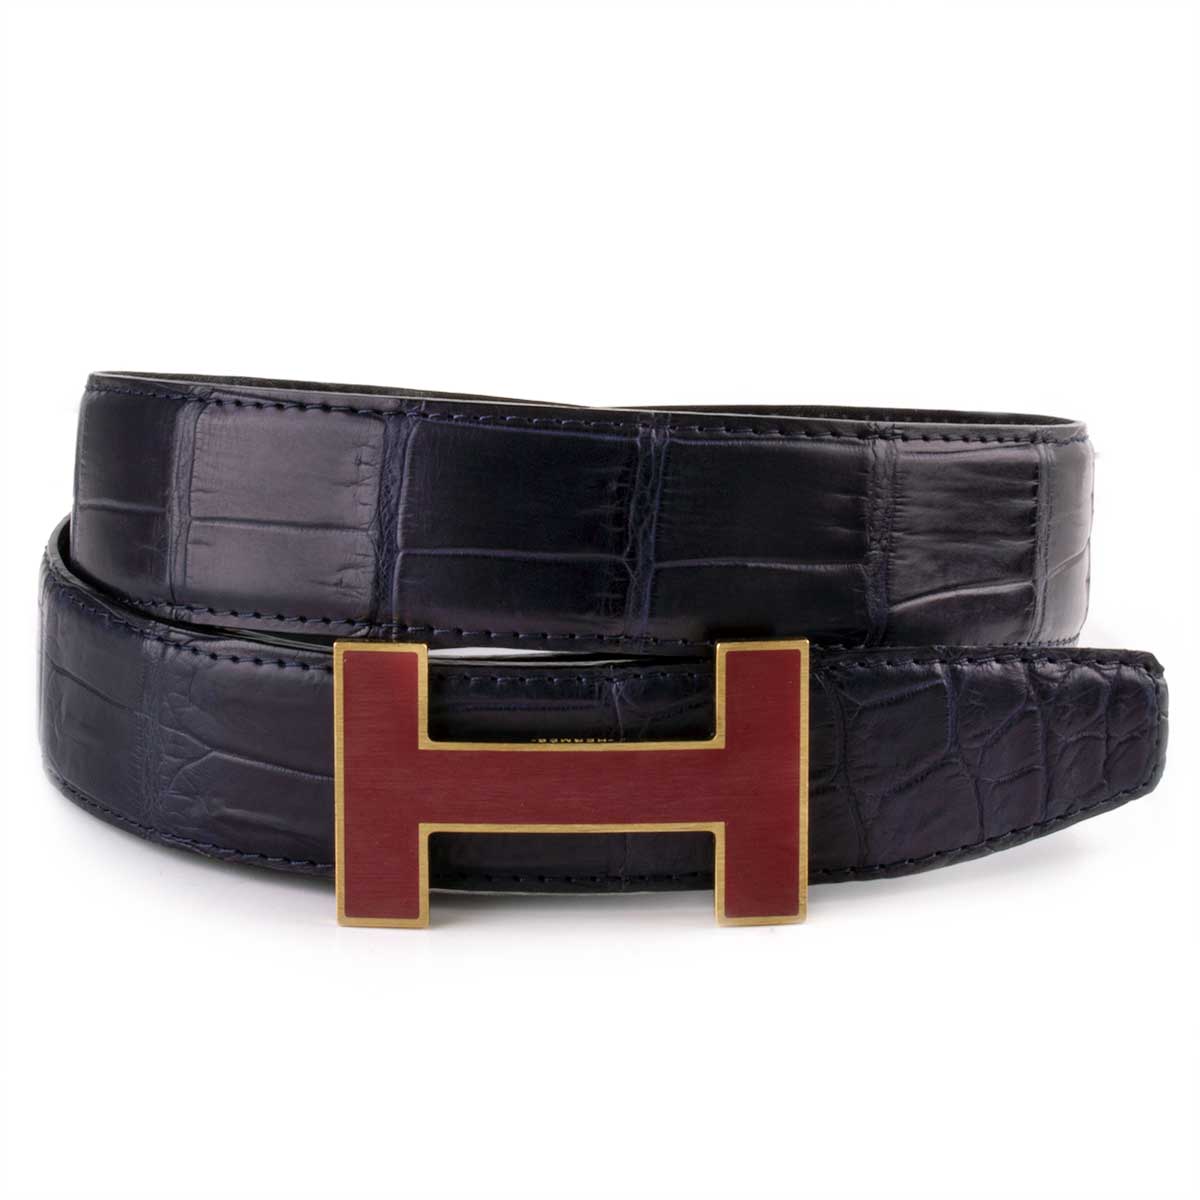 Classic leather belt with golden burgundy H buckle - Alligator – ABP  Concept